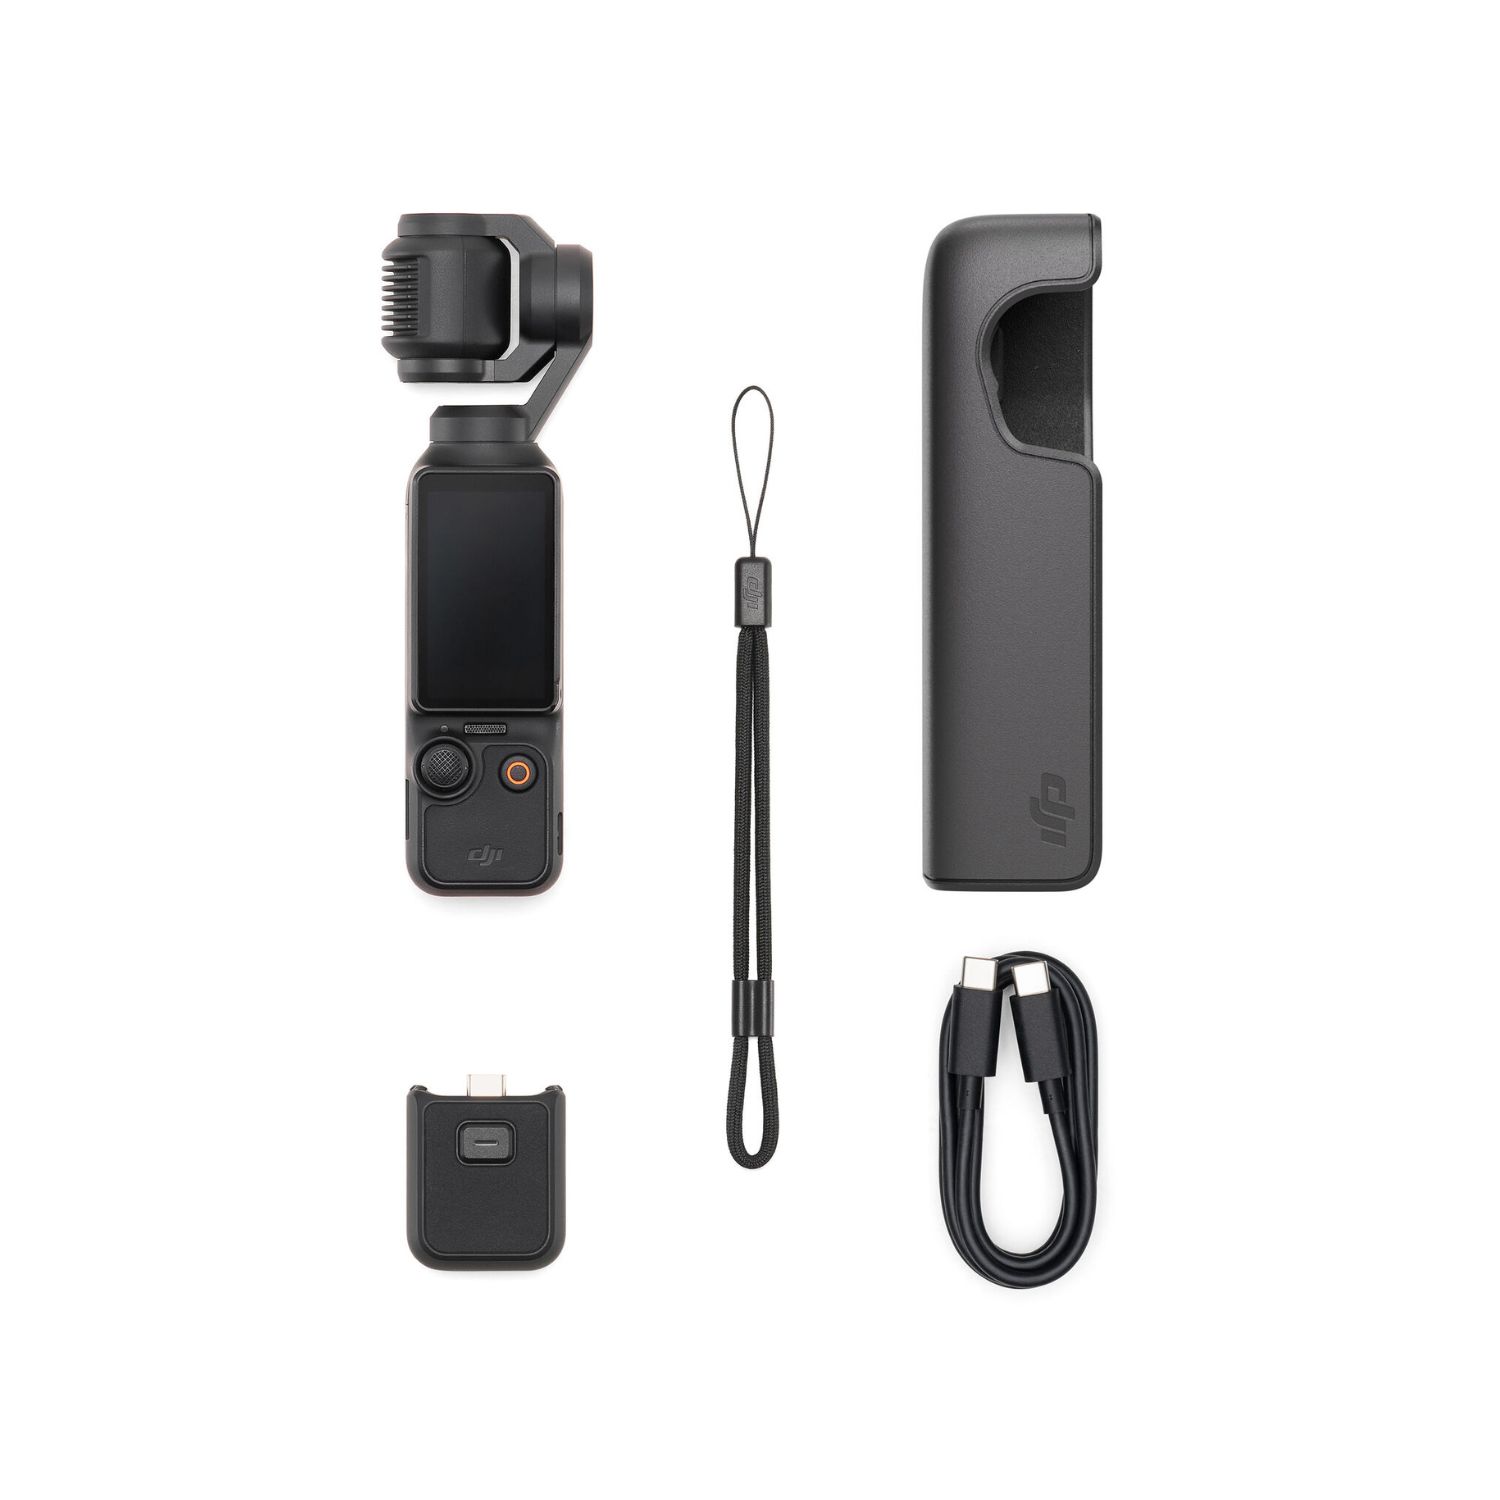 dji Osmo Pocket Sports and Action Camera Price in India - Buy dji Osmo  Pocket Sports and Action Camera online at